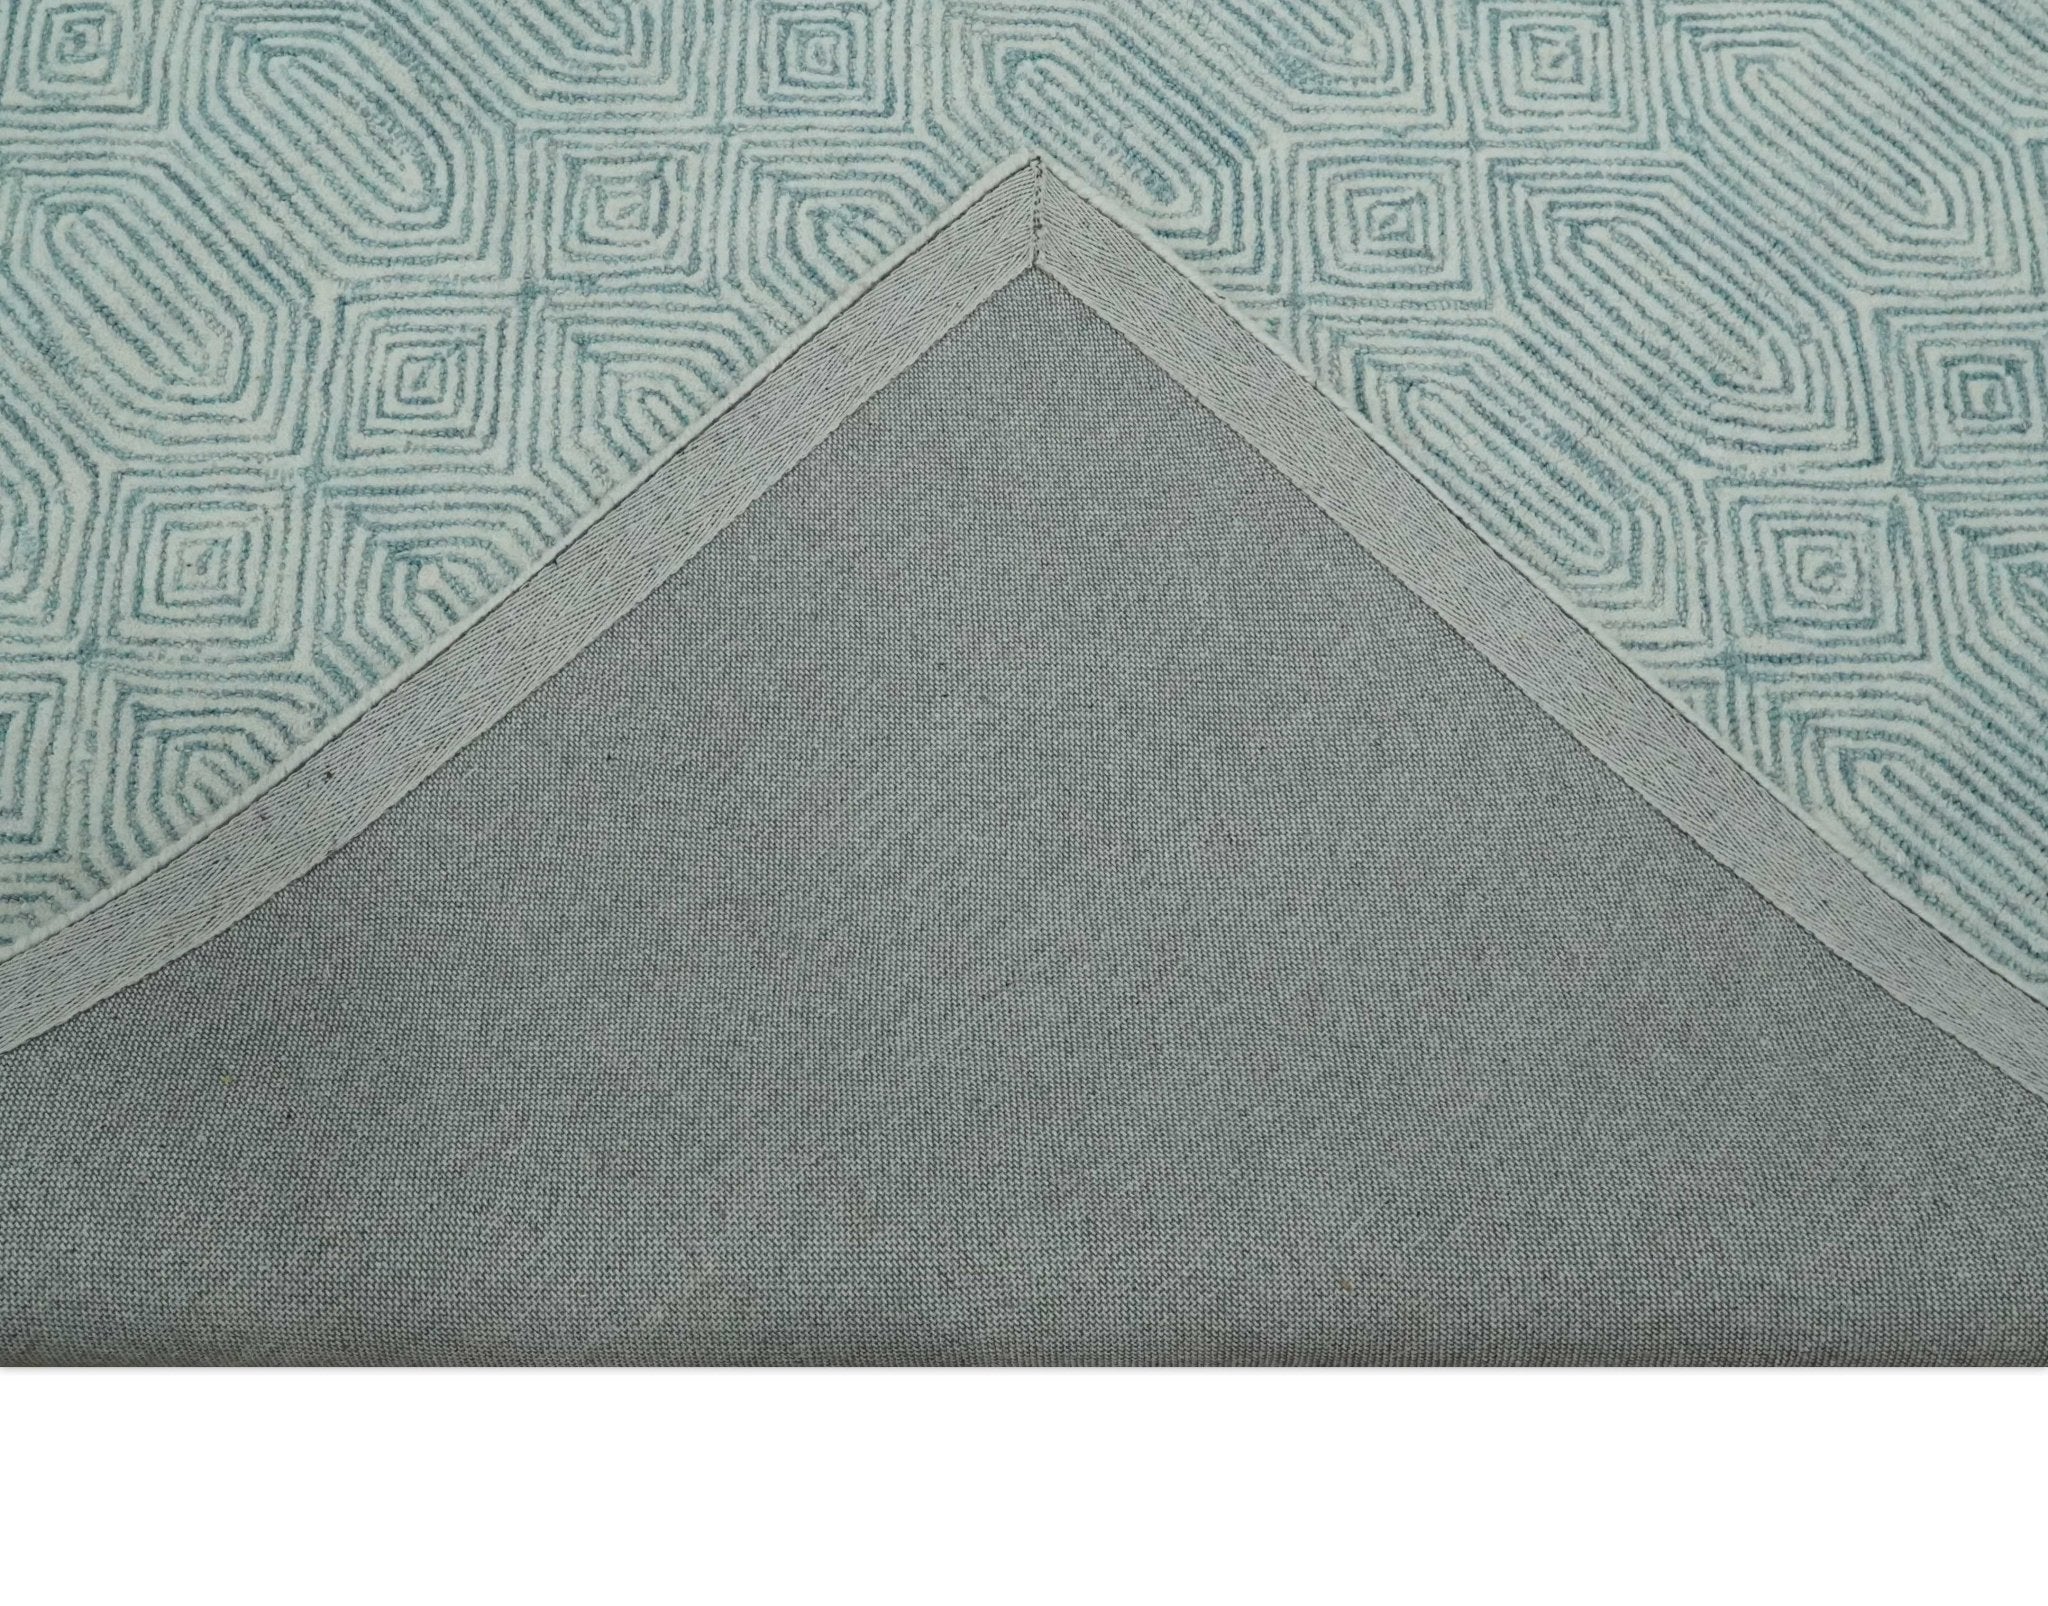 Scandinavian Scatter Rug with Green Geometric Patterns